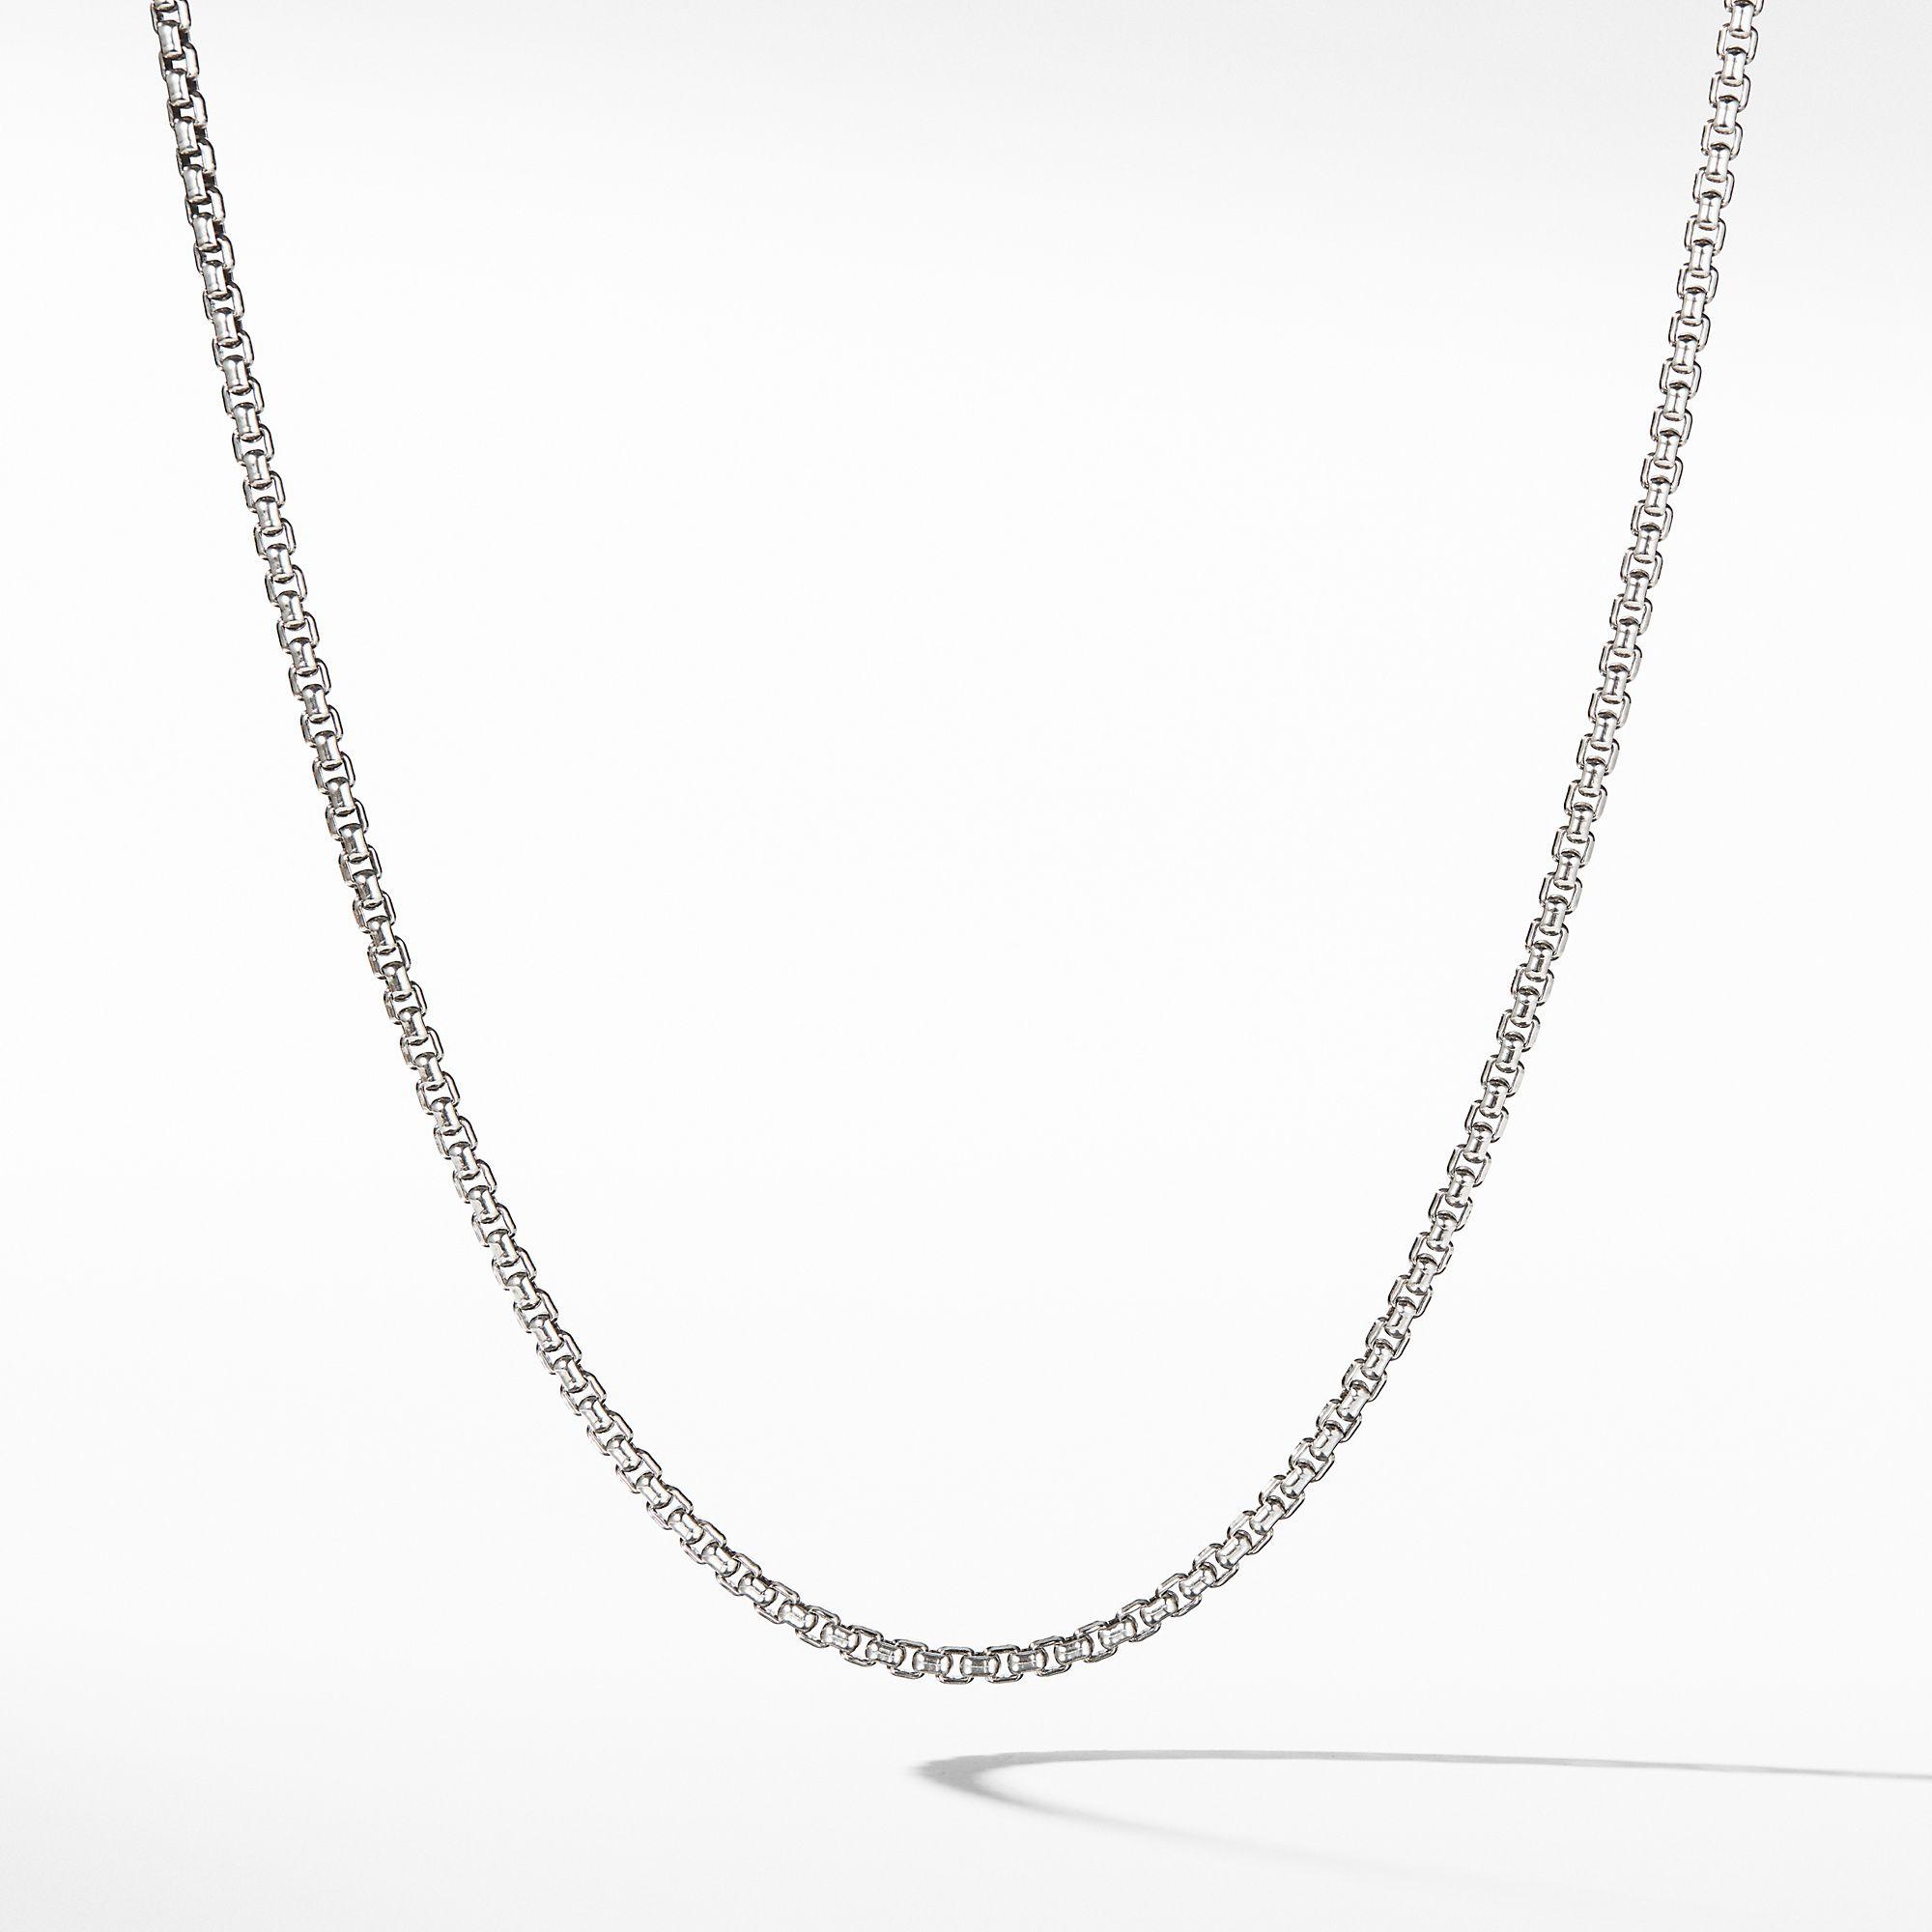 David Yurman Small Box Chain Necklace in Sterling Silver and 14K Yellow Gold